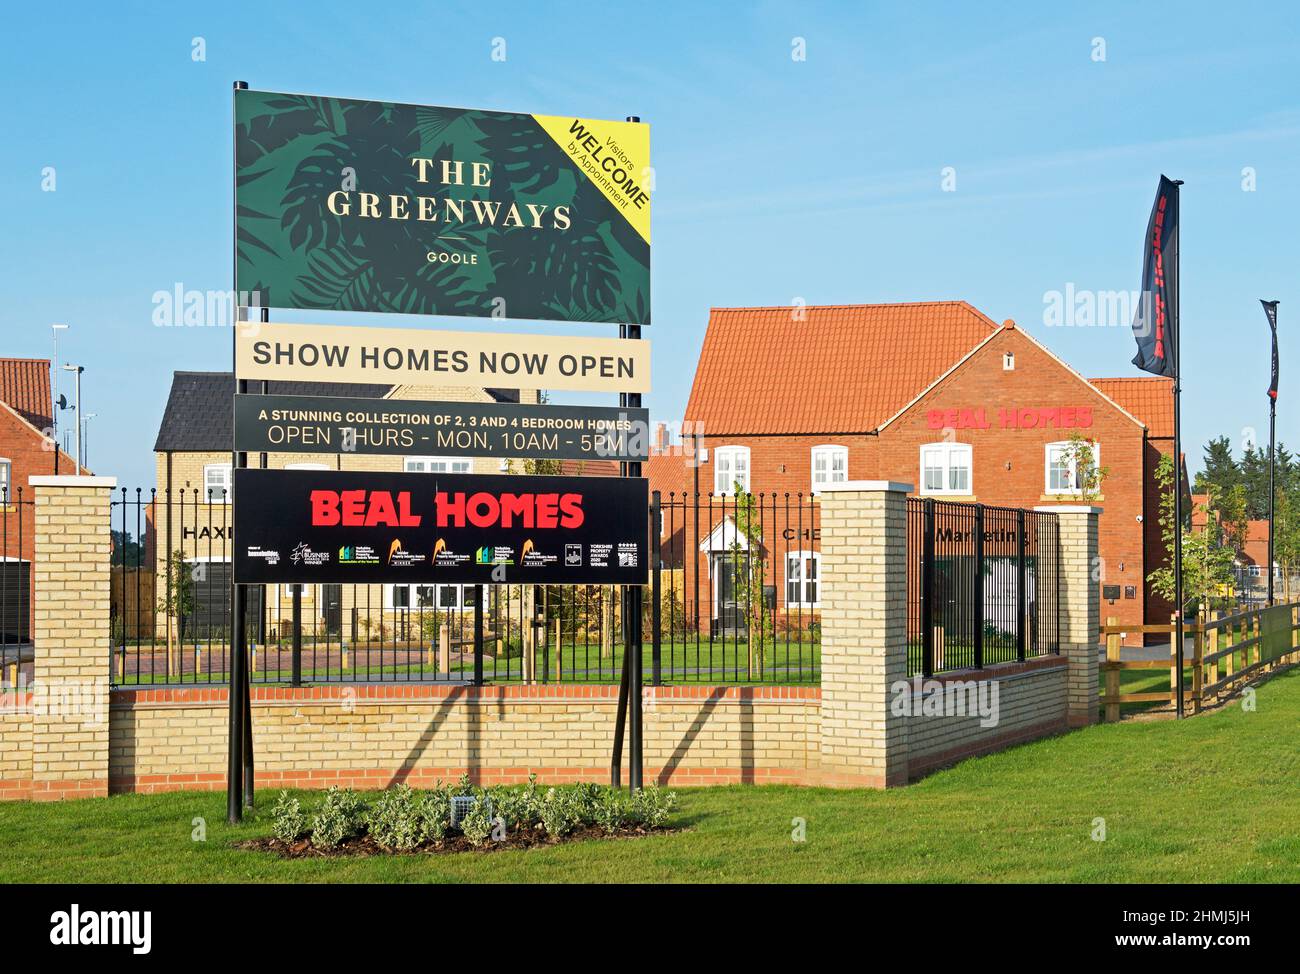 Greenways, a new housing development by Beal Homes, on Rawcliffe Road, Goole, East Yorkshire, England UK Stock Photo